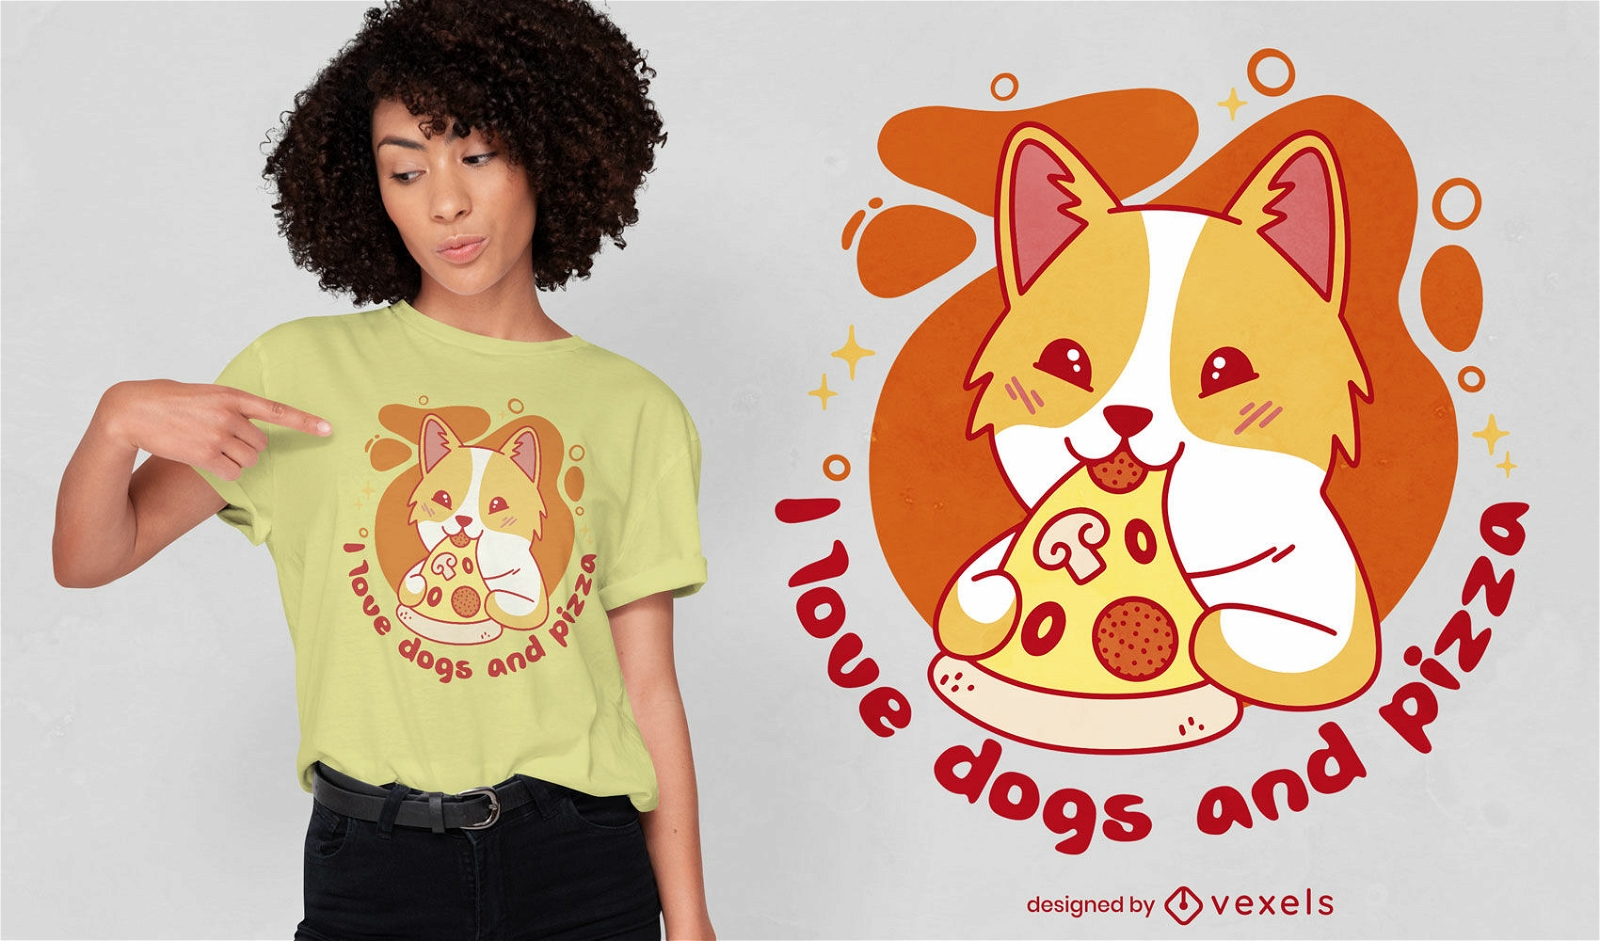 Dogs and pizza lover t-shirt design